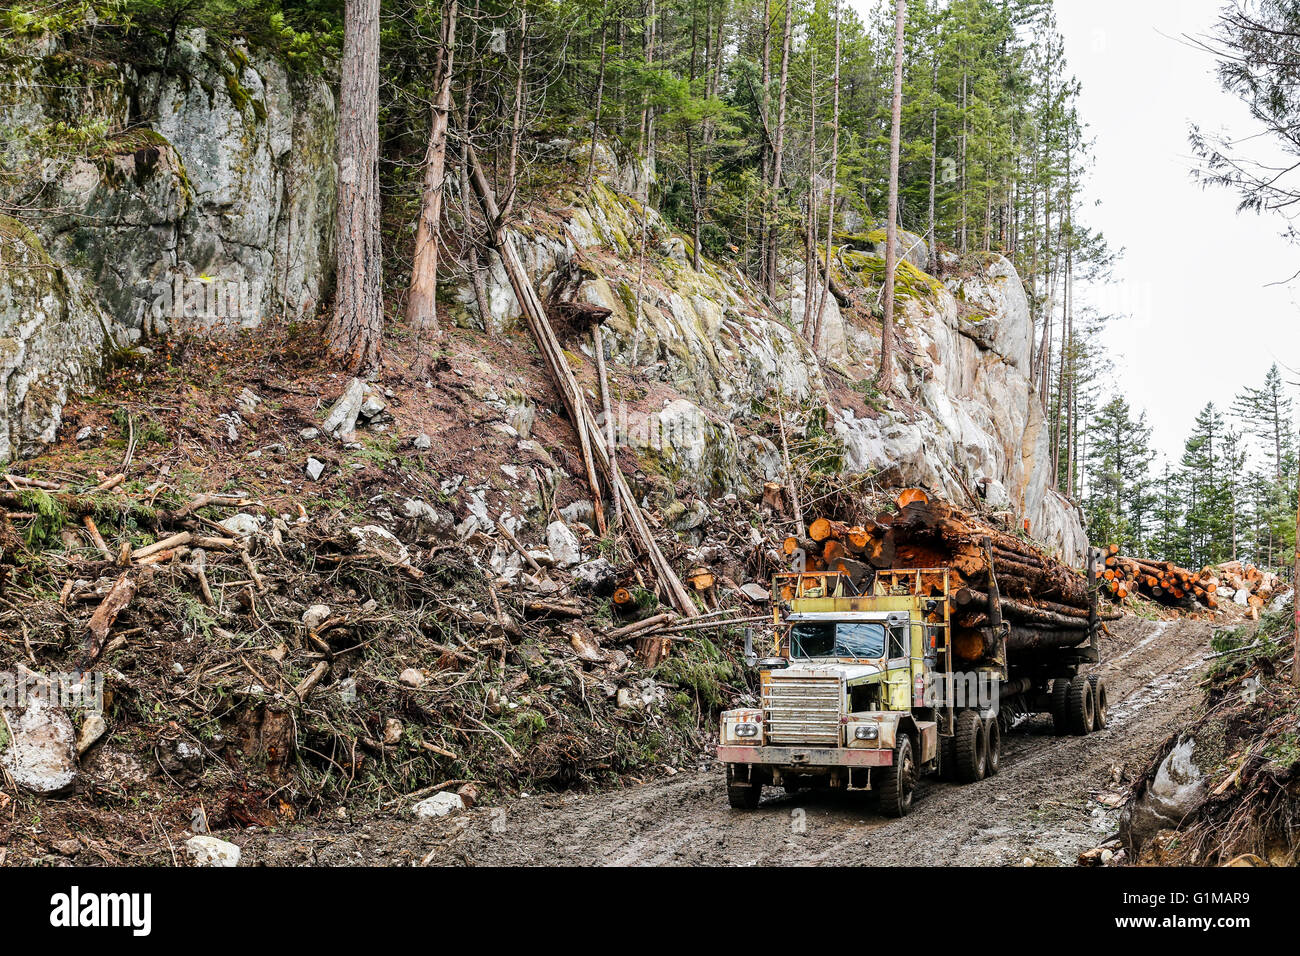 Loaded logging truck on forest road Stock Photo